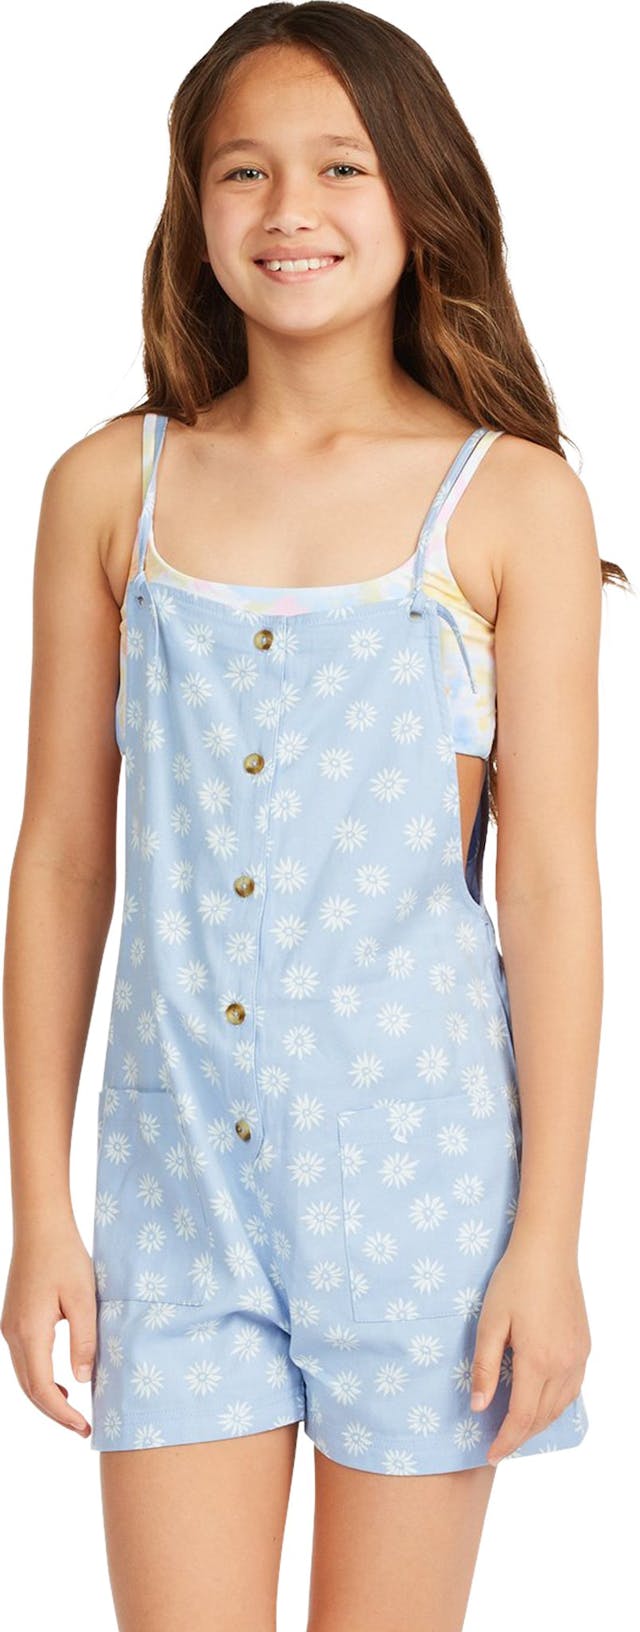 Product image for Wave Watch Jr. Romper - Girls